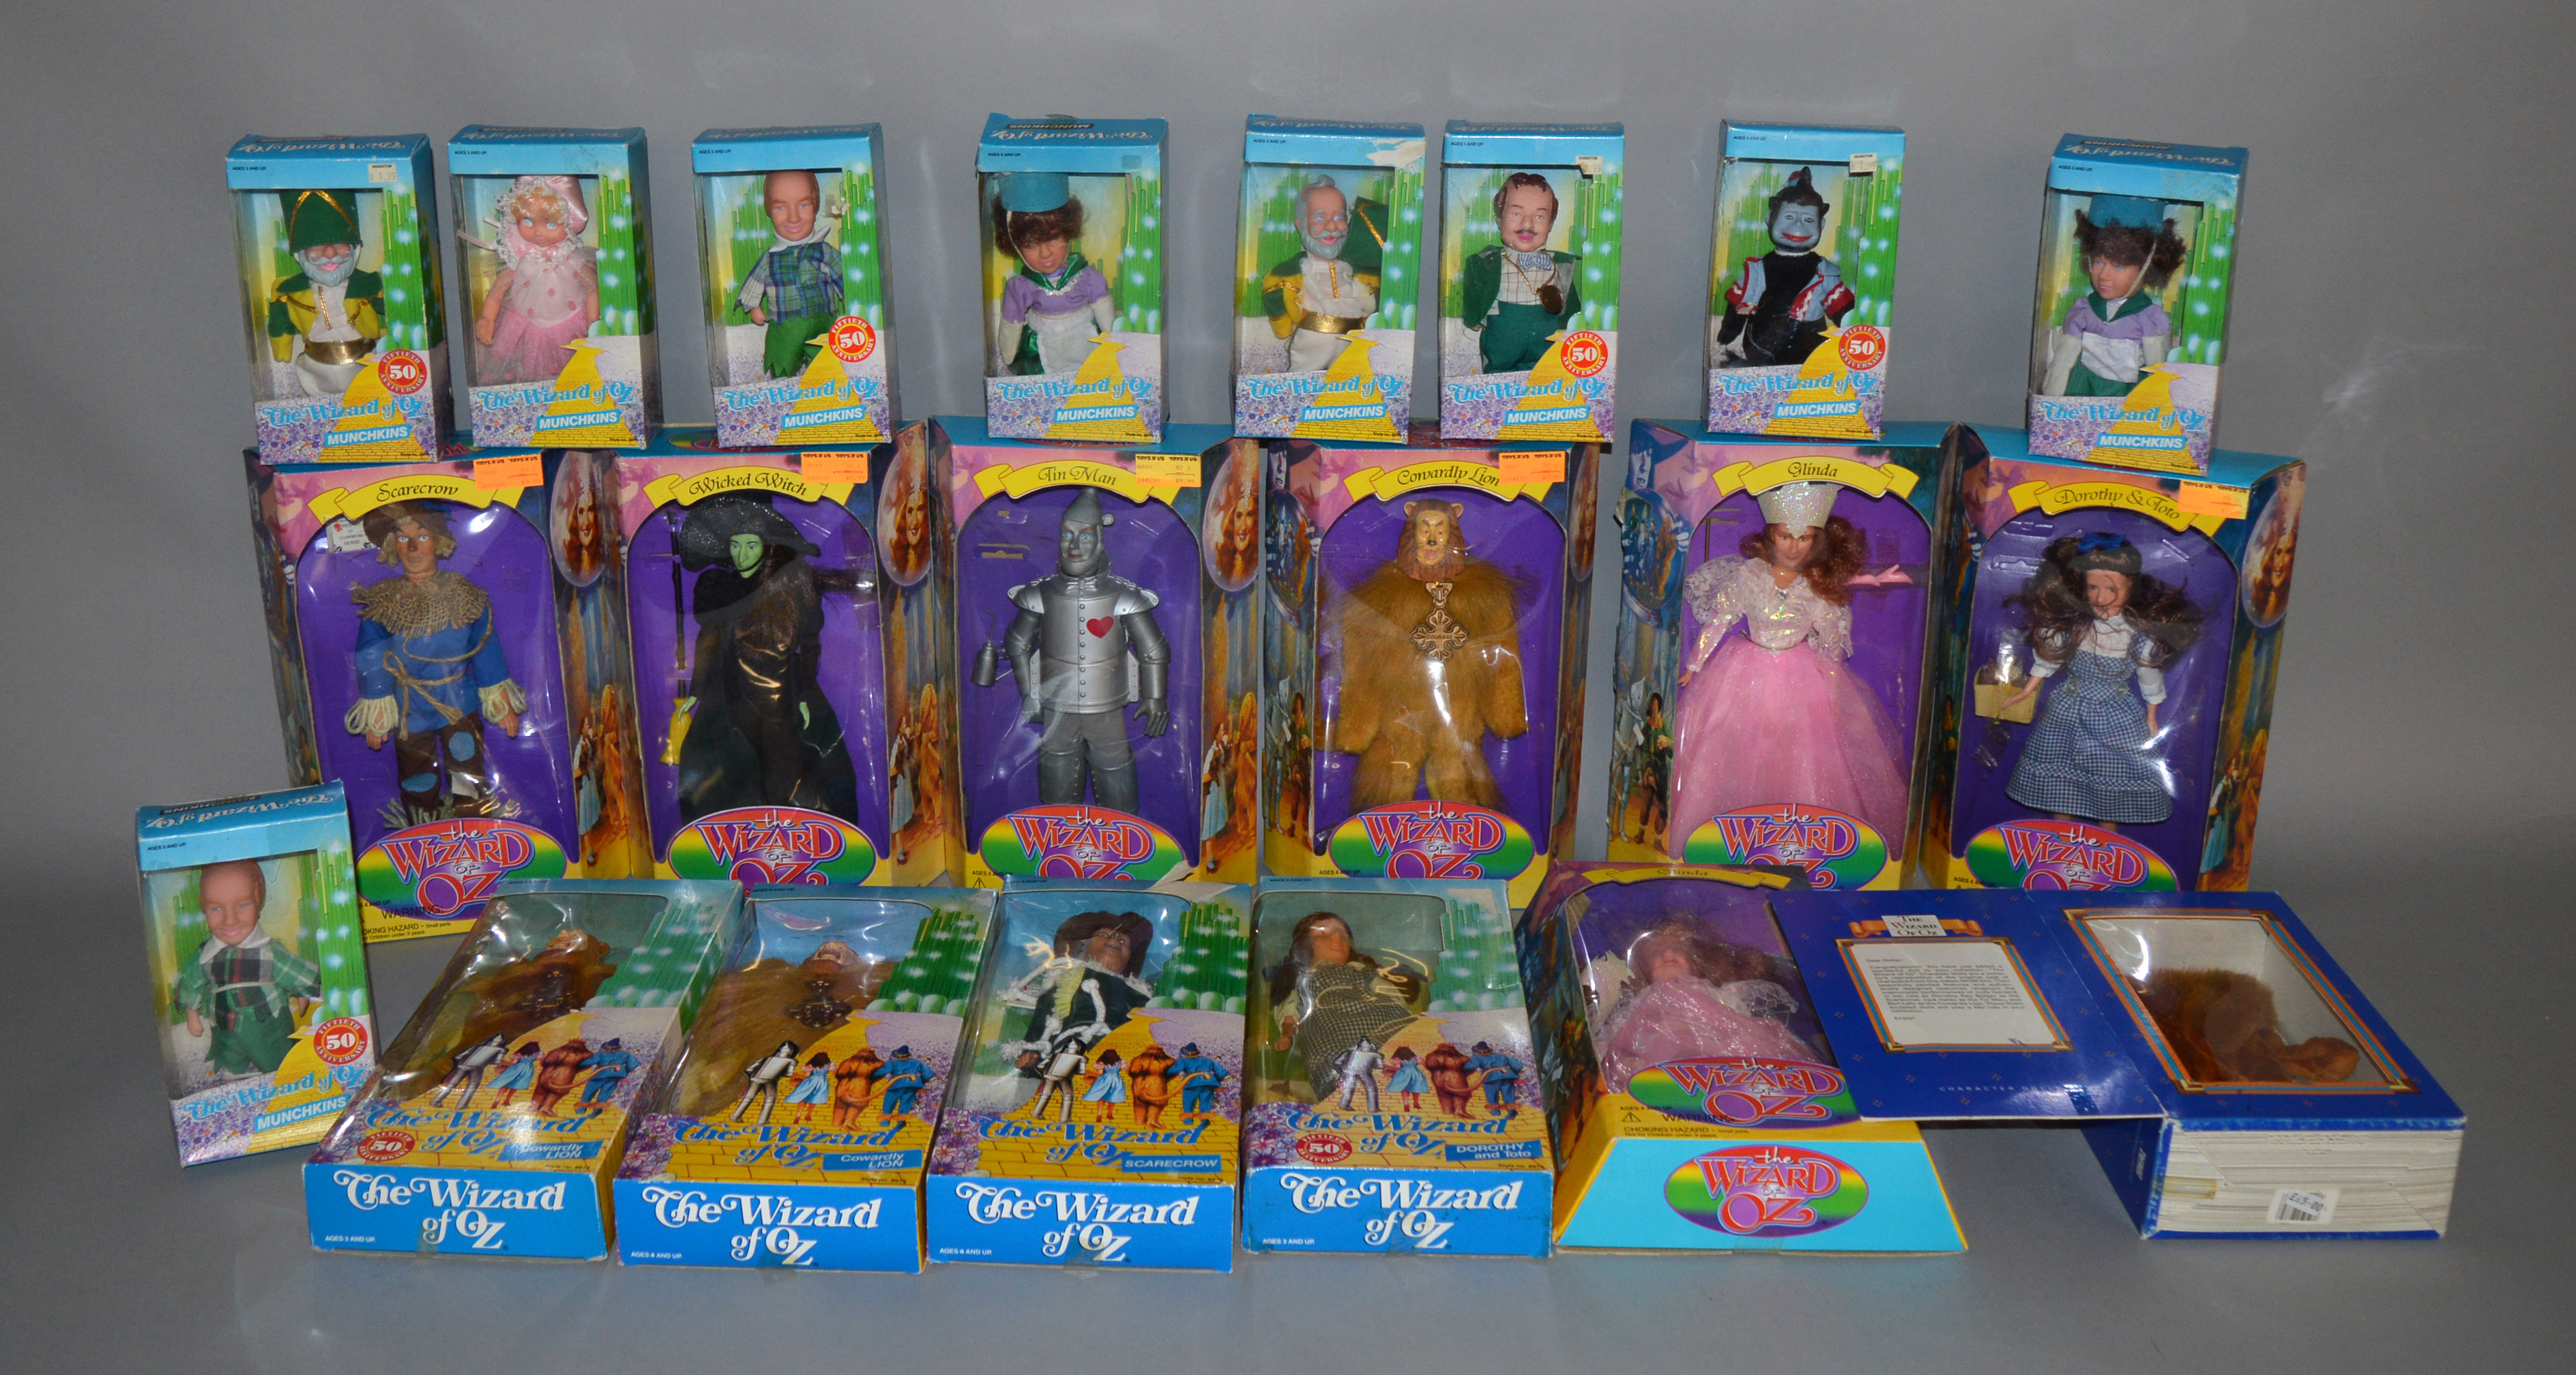 EX-SHOP STOCK: Twenty one Wizard Of Oz Dolls including 50th Anniversary examples and an Ideal